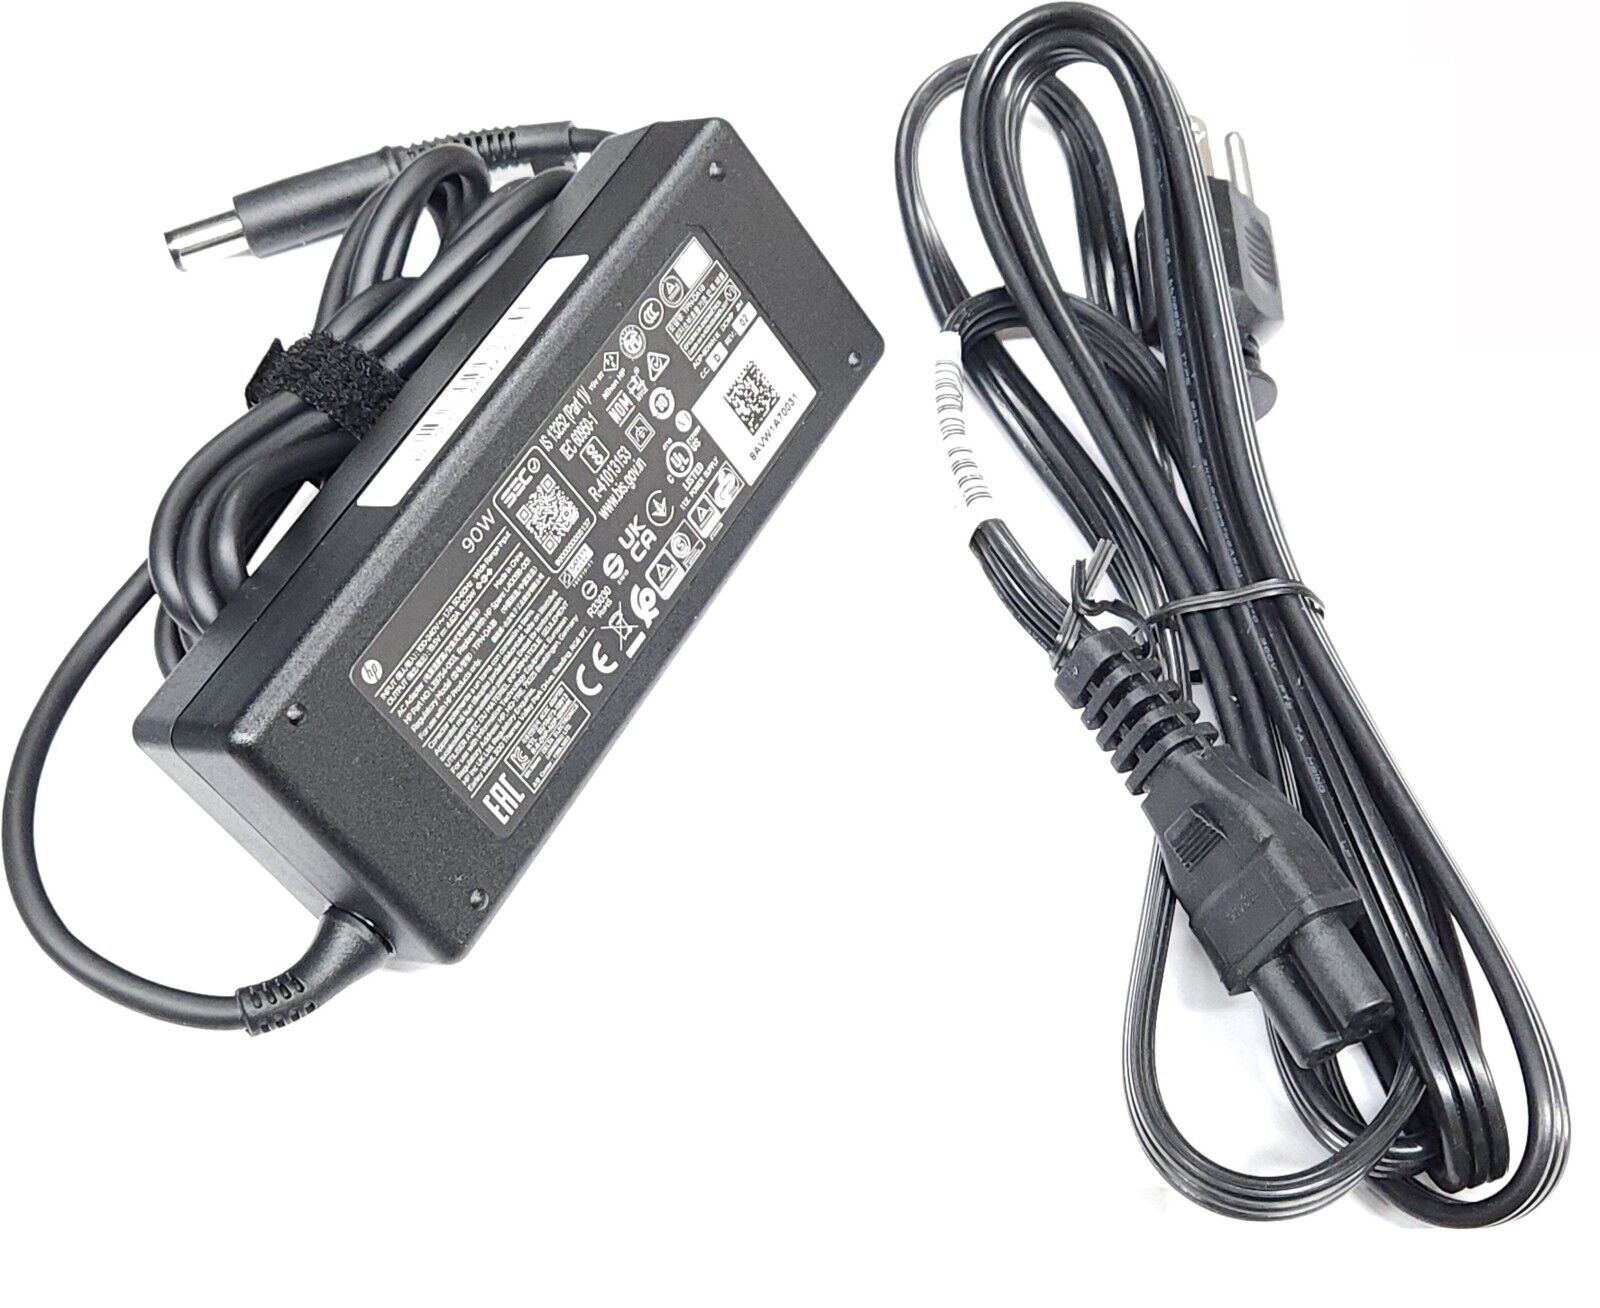 New Genuine HP OEM AC Power Adapter Supply Charger 90W for HP EliteDesk 705 G5